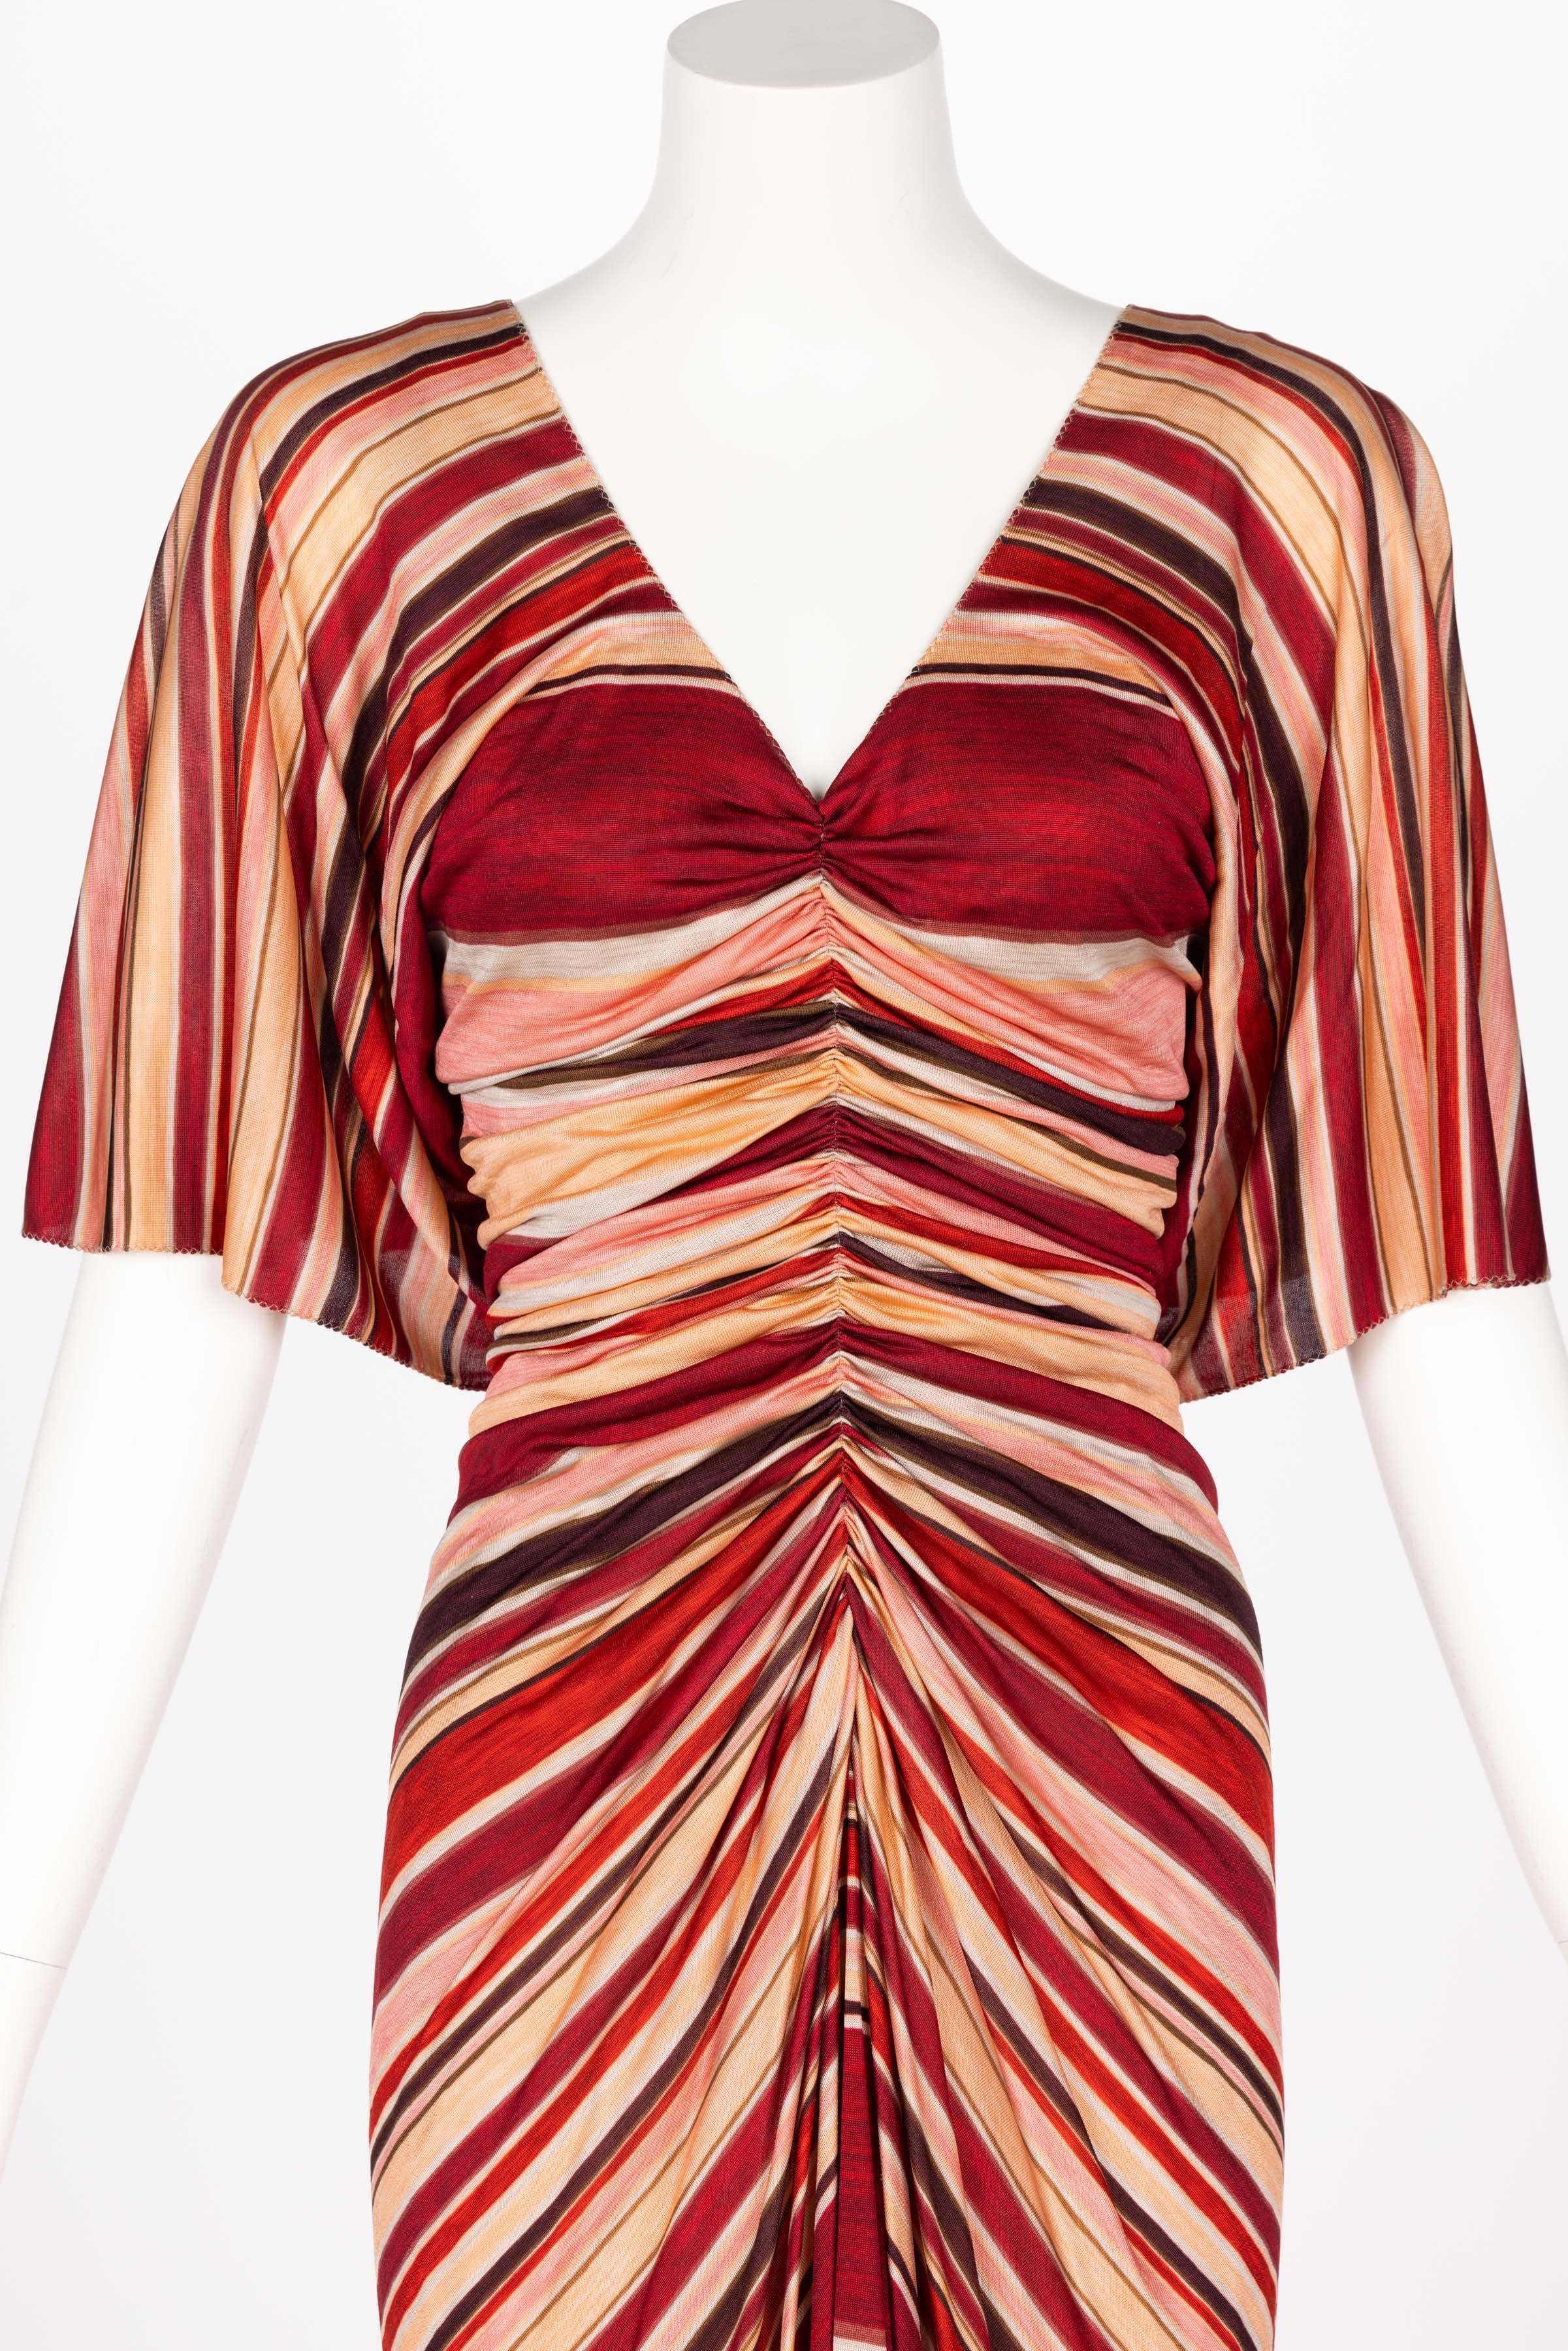 Marc Jacobs Spring 2011 Red & Pink Striped Silk Dress For Sale 5